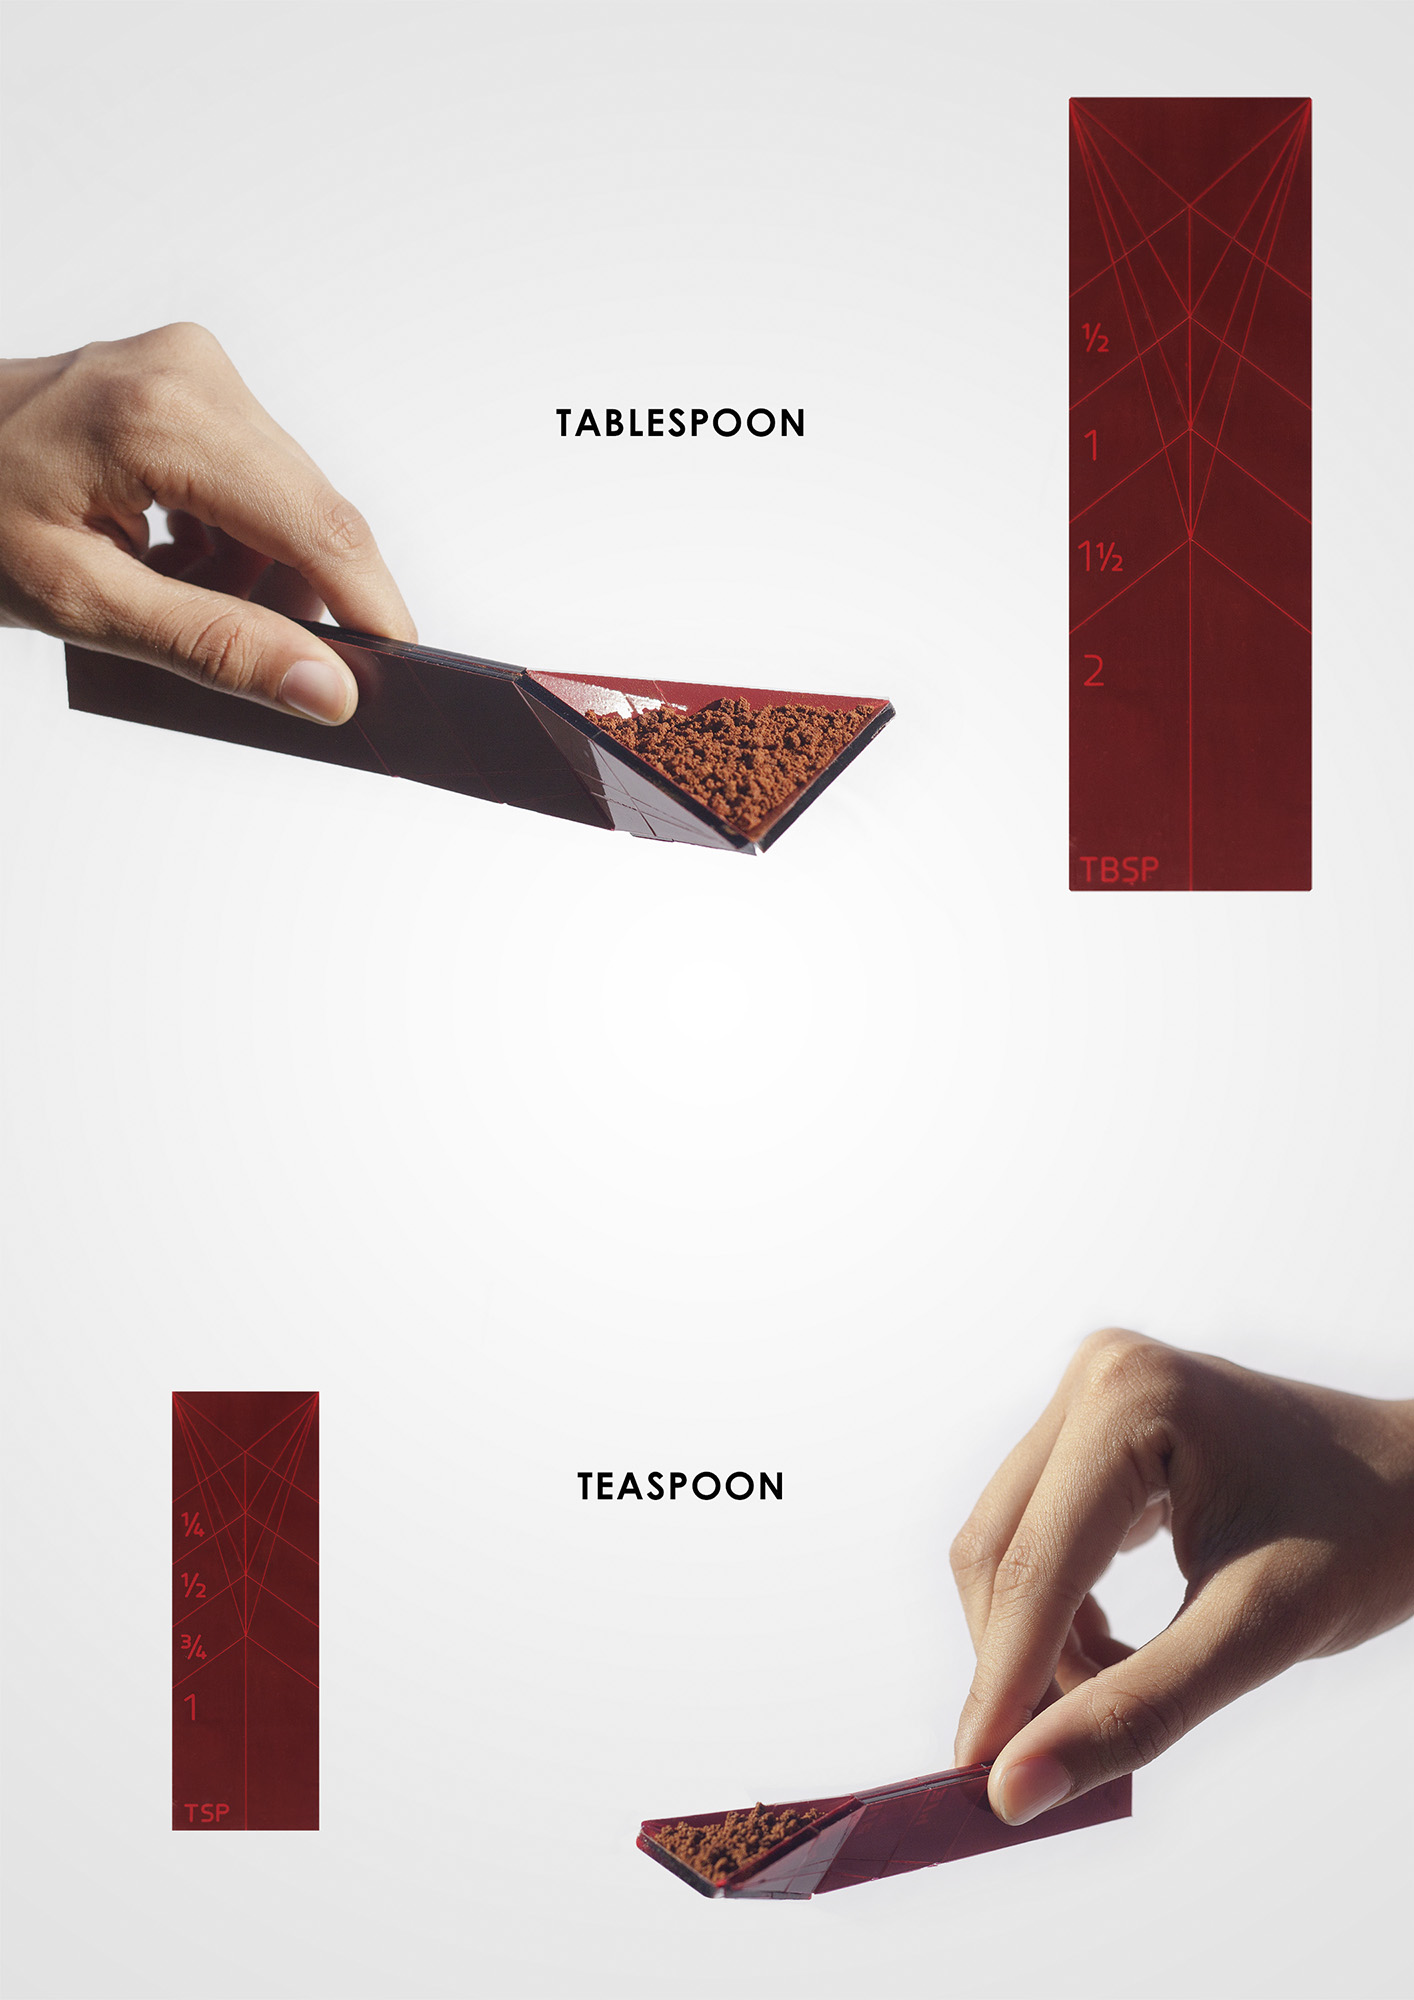 Polygons is the origami-like measuring spoon that lays flat and